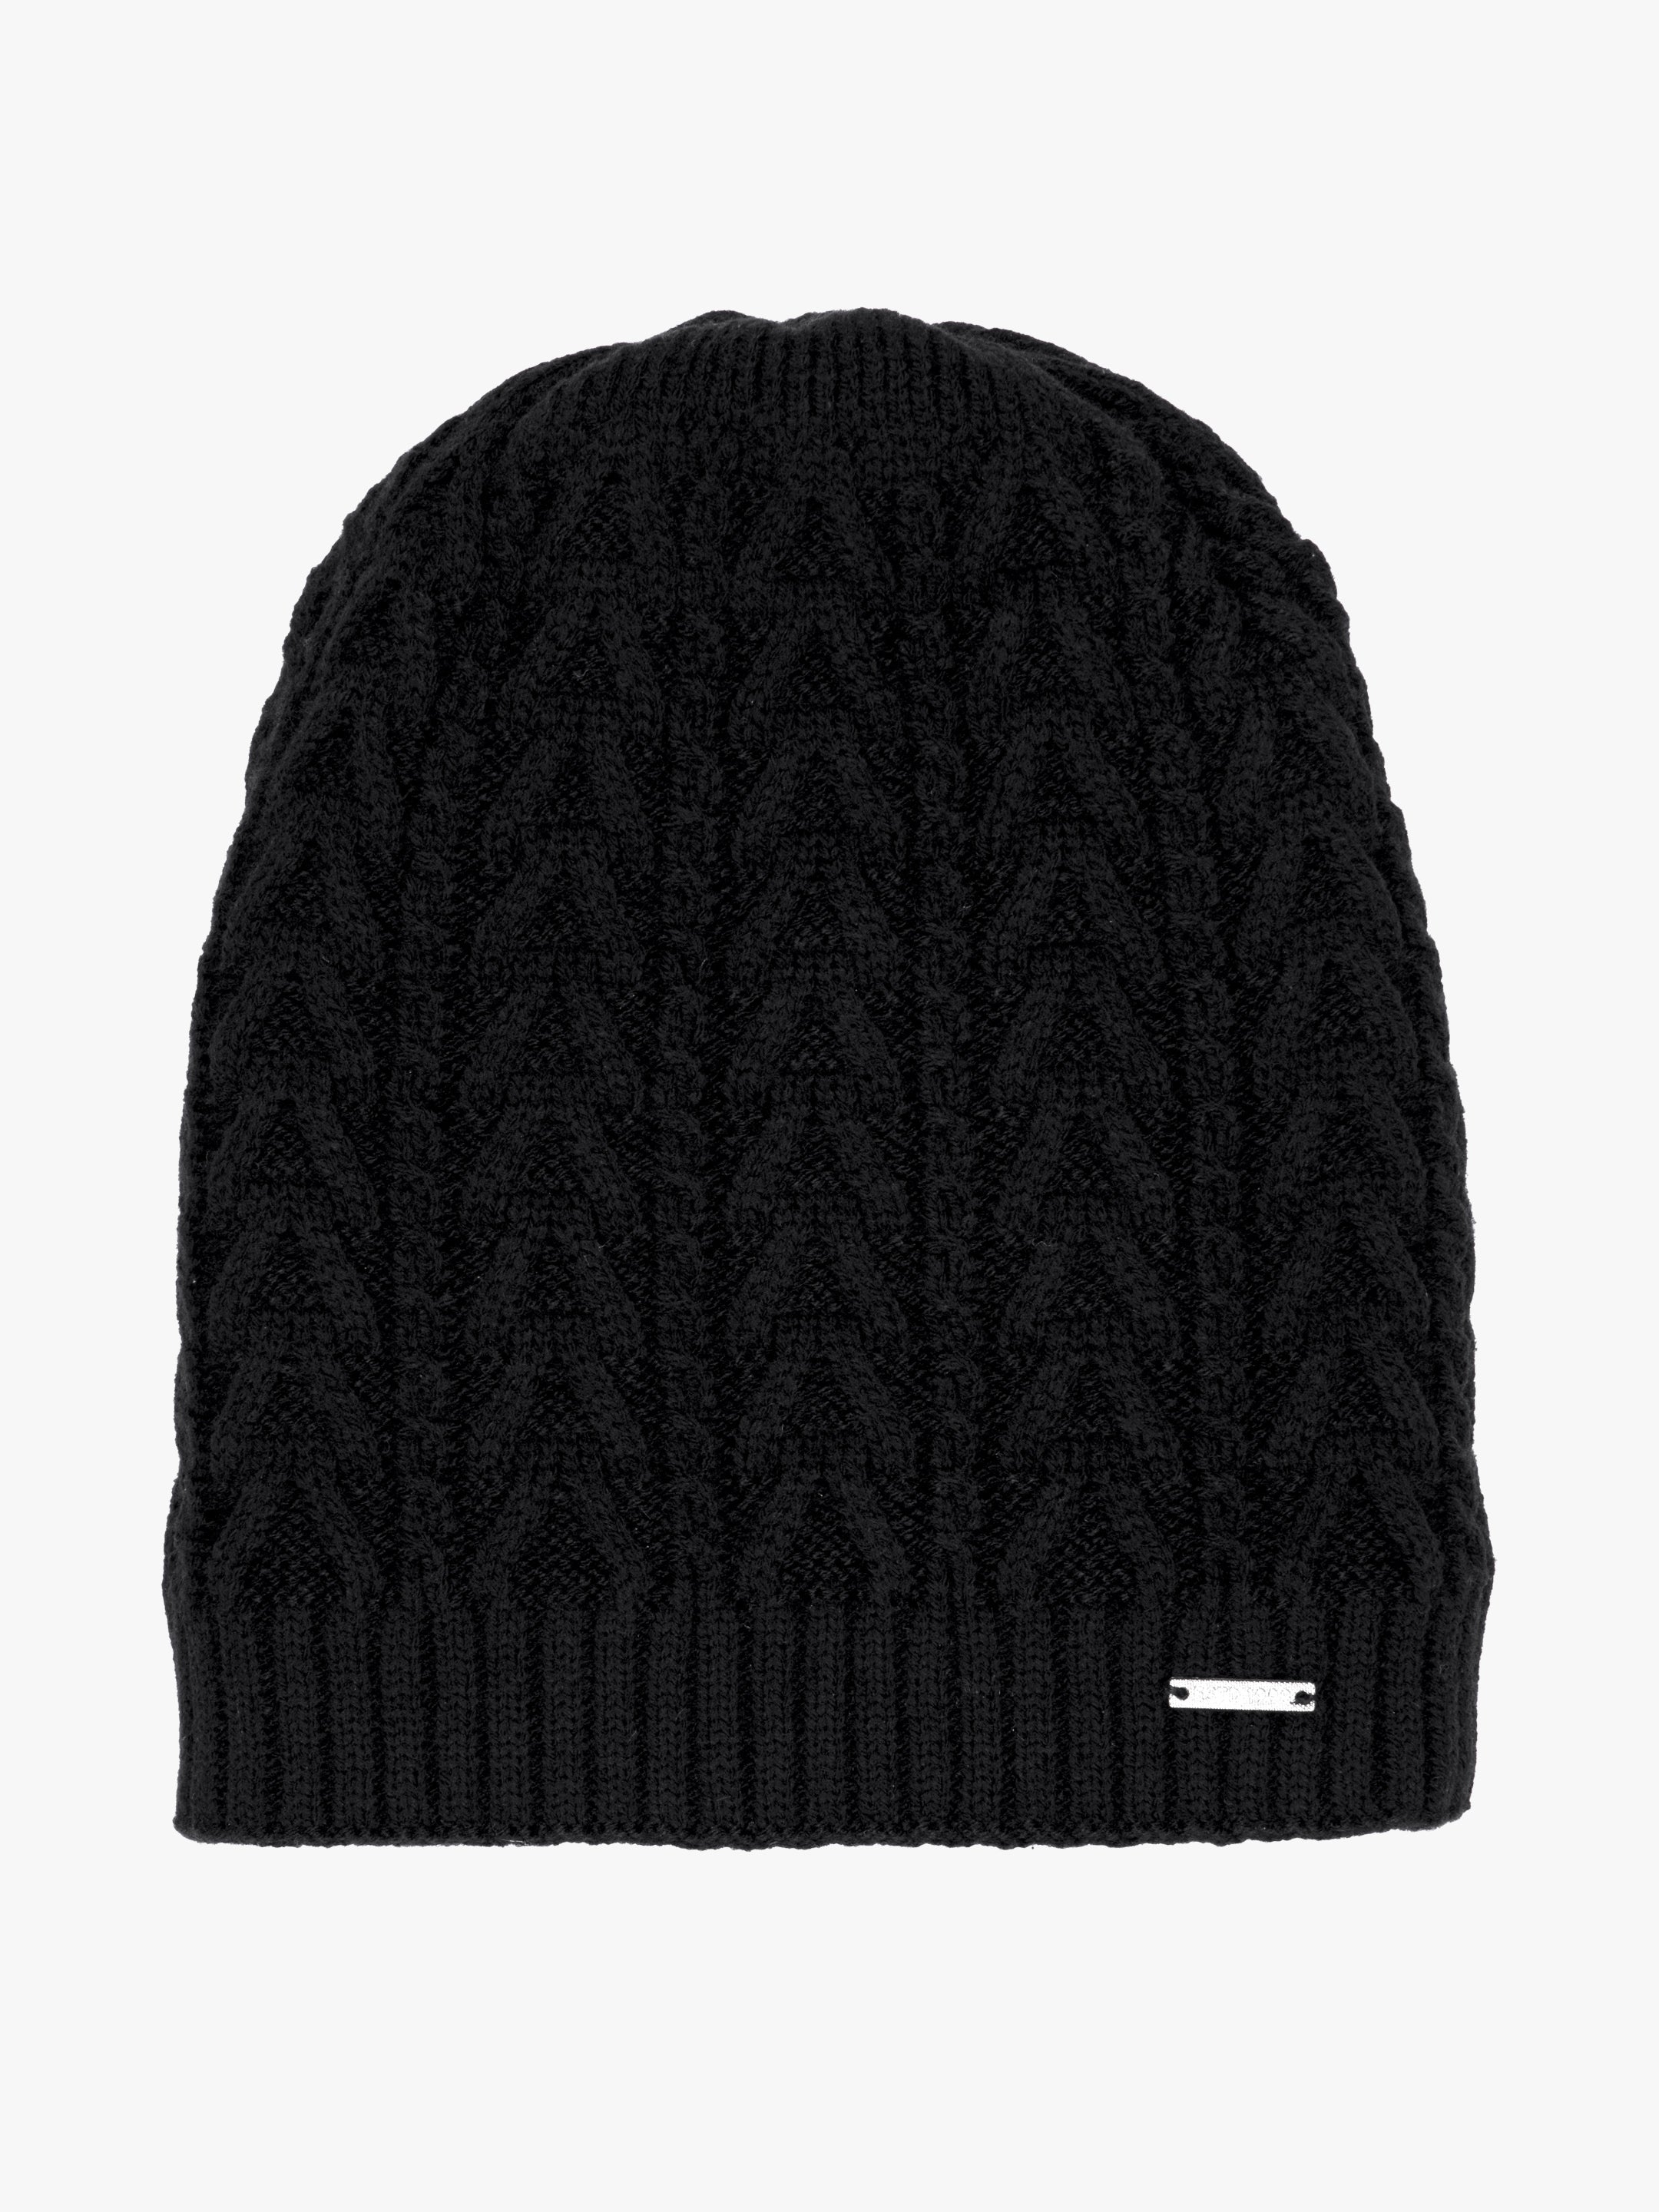 Mens Knitted Winter Cap